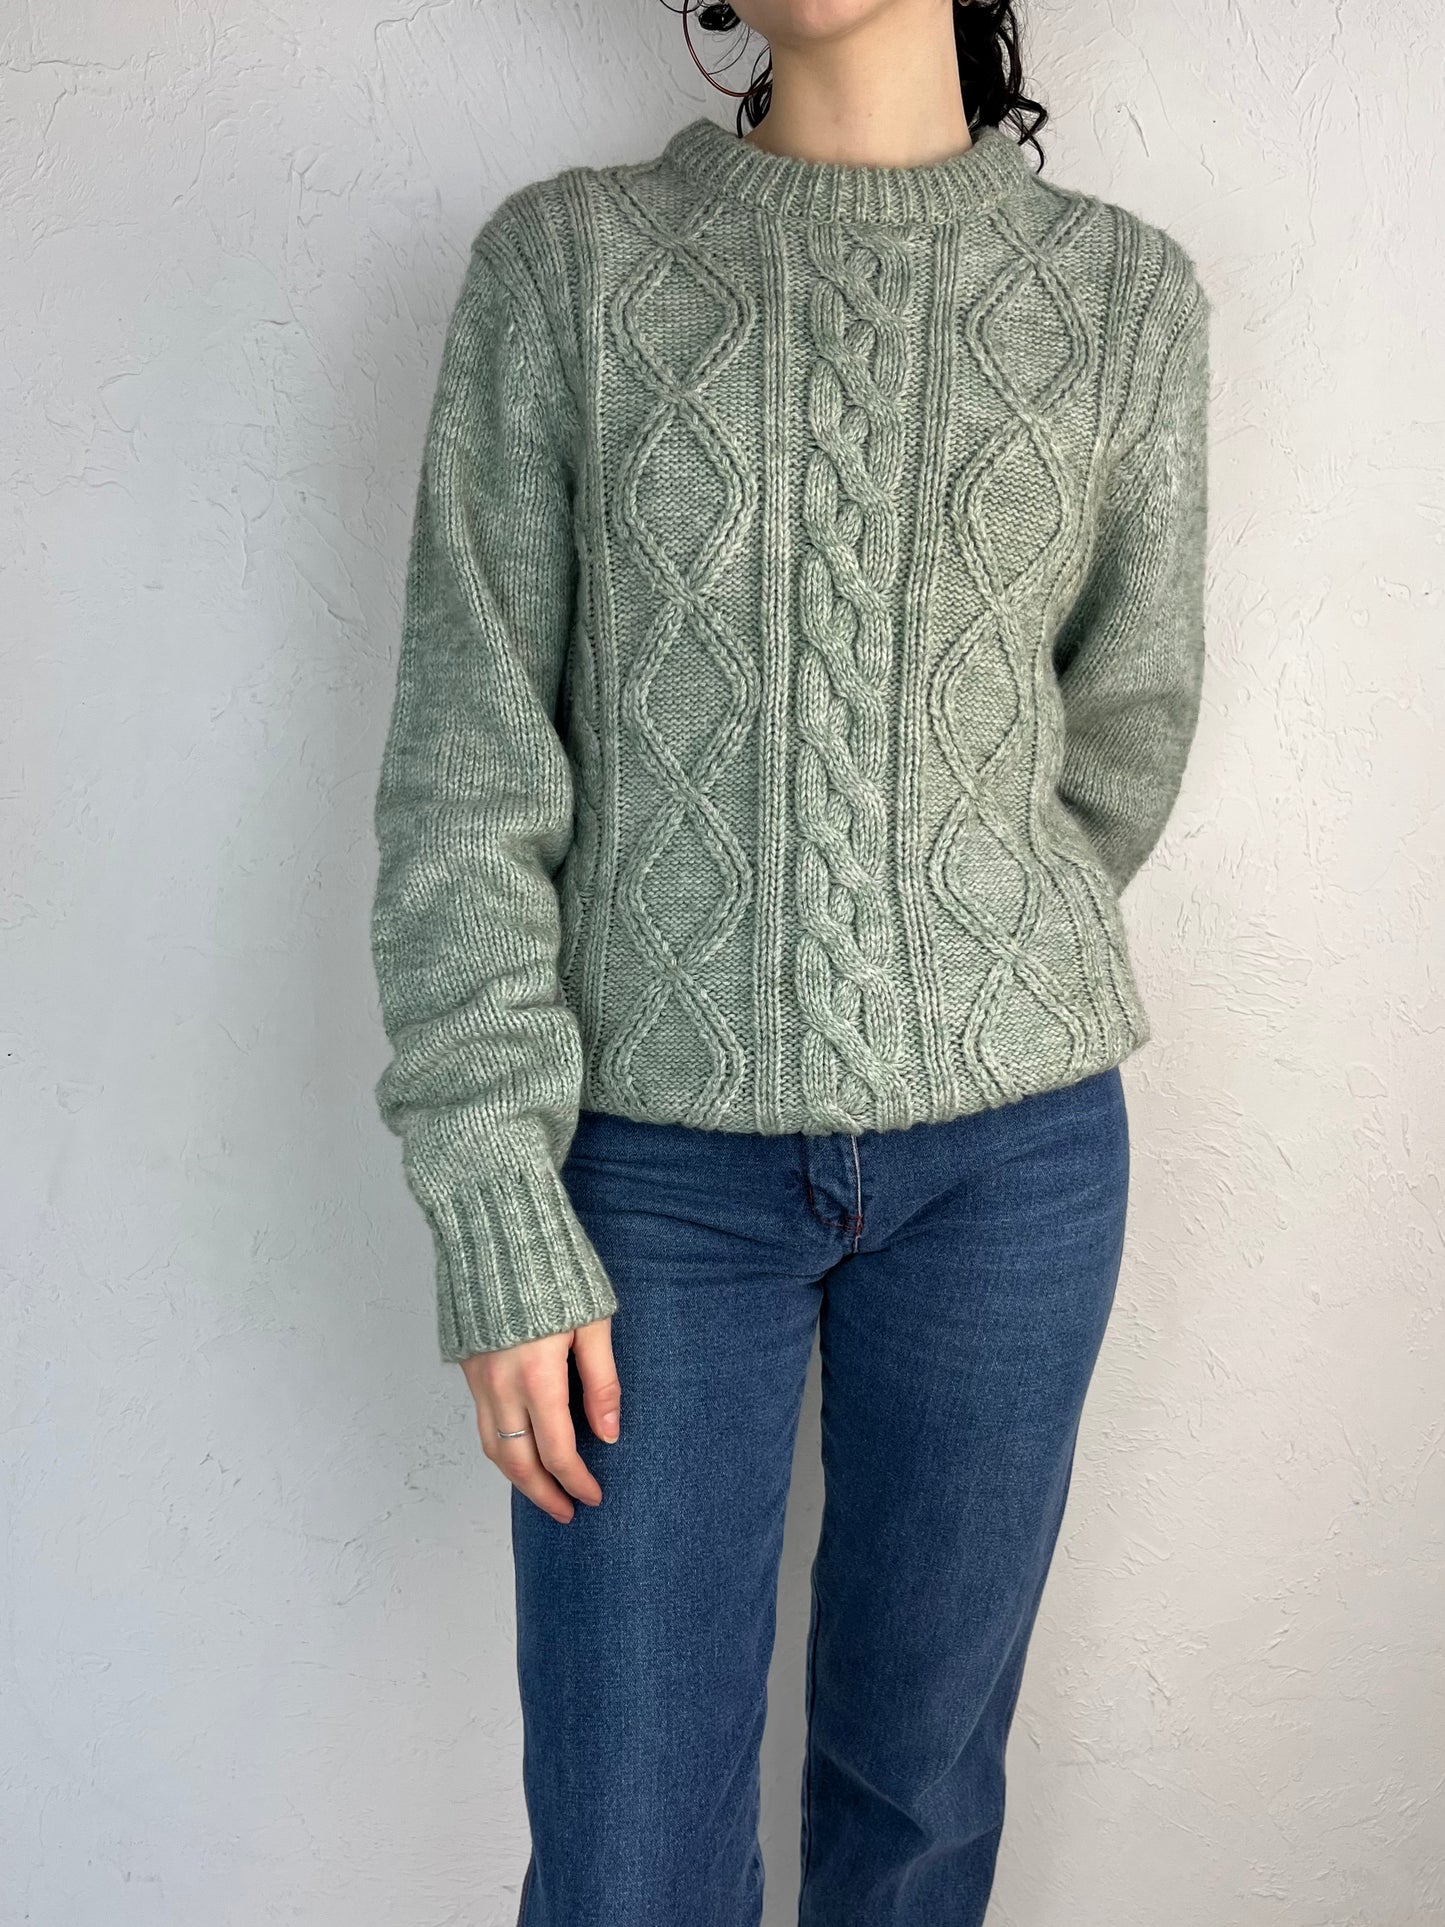 90s Teal Cable Knit Crew Neck Sweater